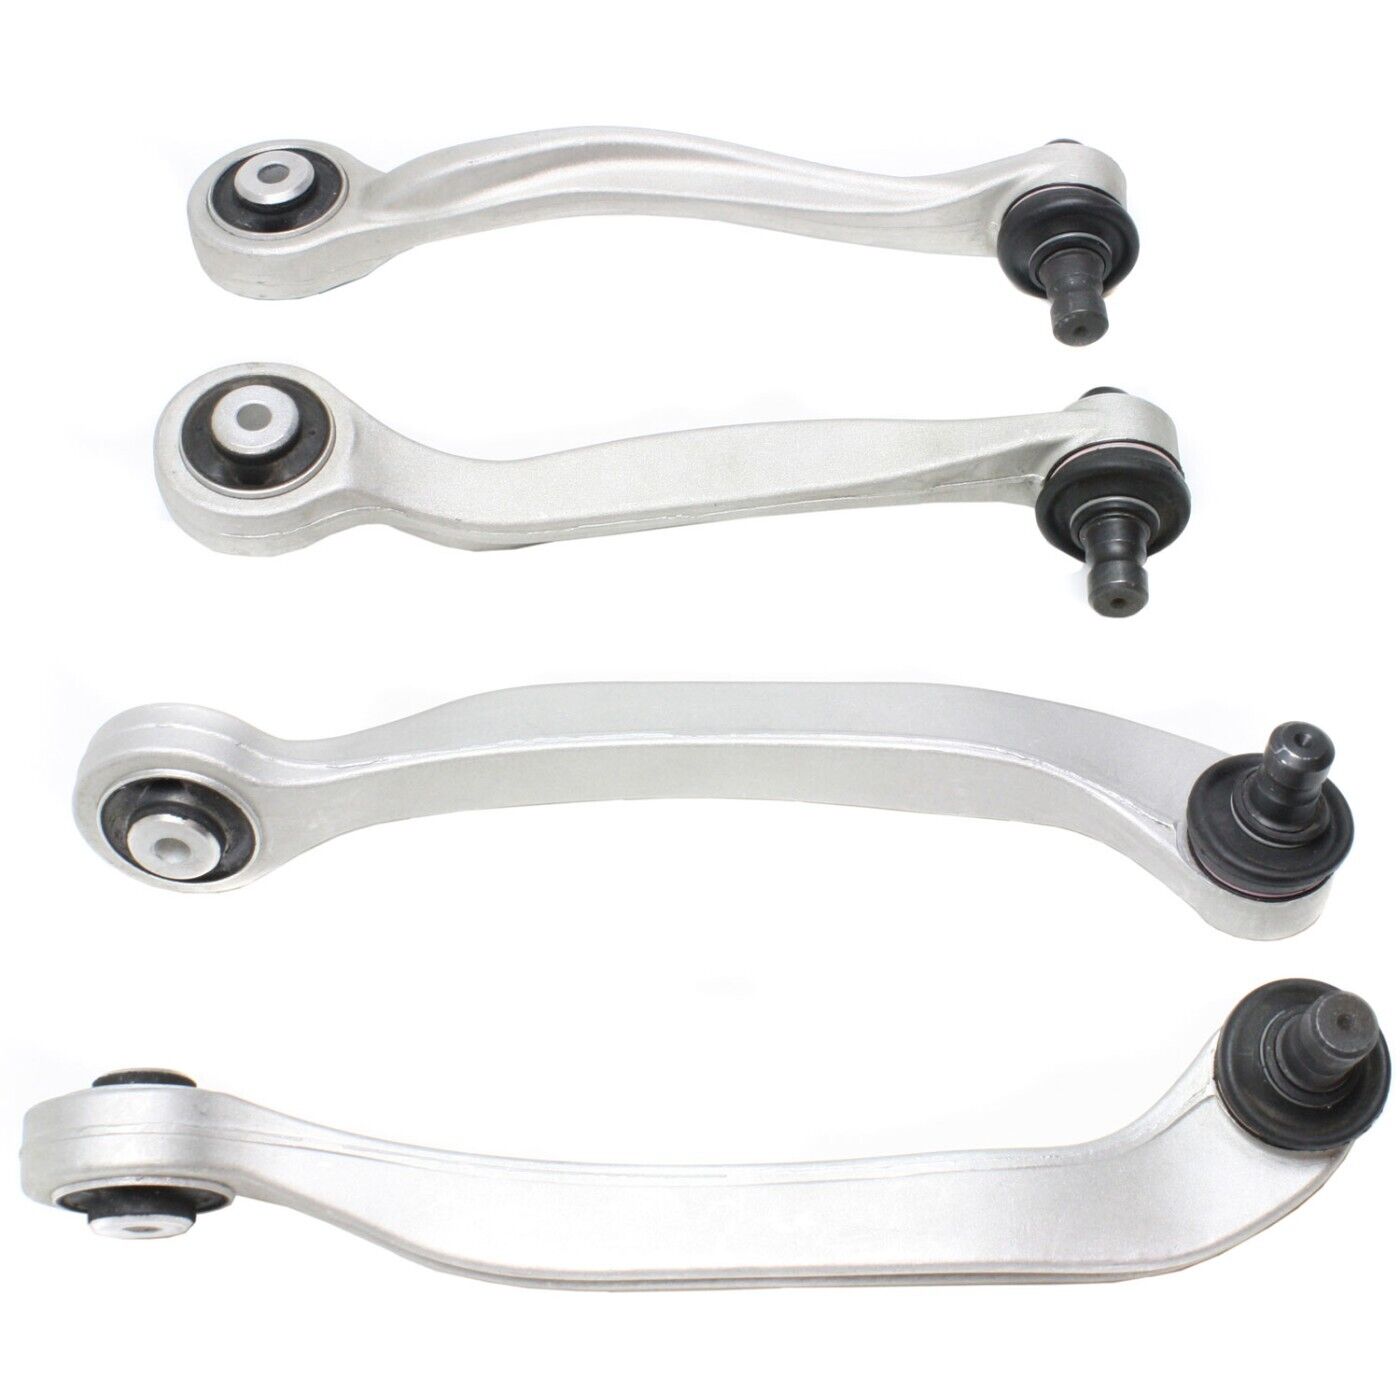 Control Arm Kit For 04 Audi A8 Quattro Front Upper Frontward & Rearward Set of 4